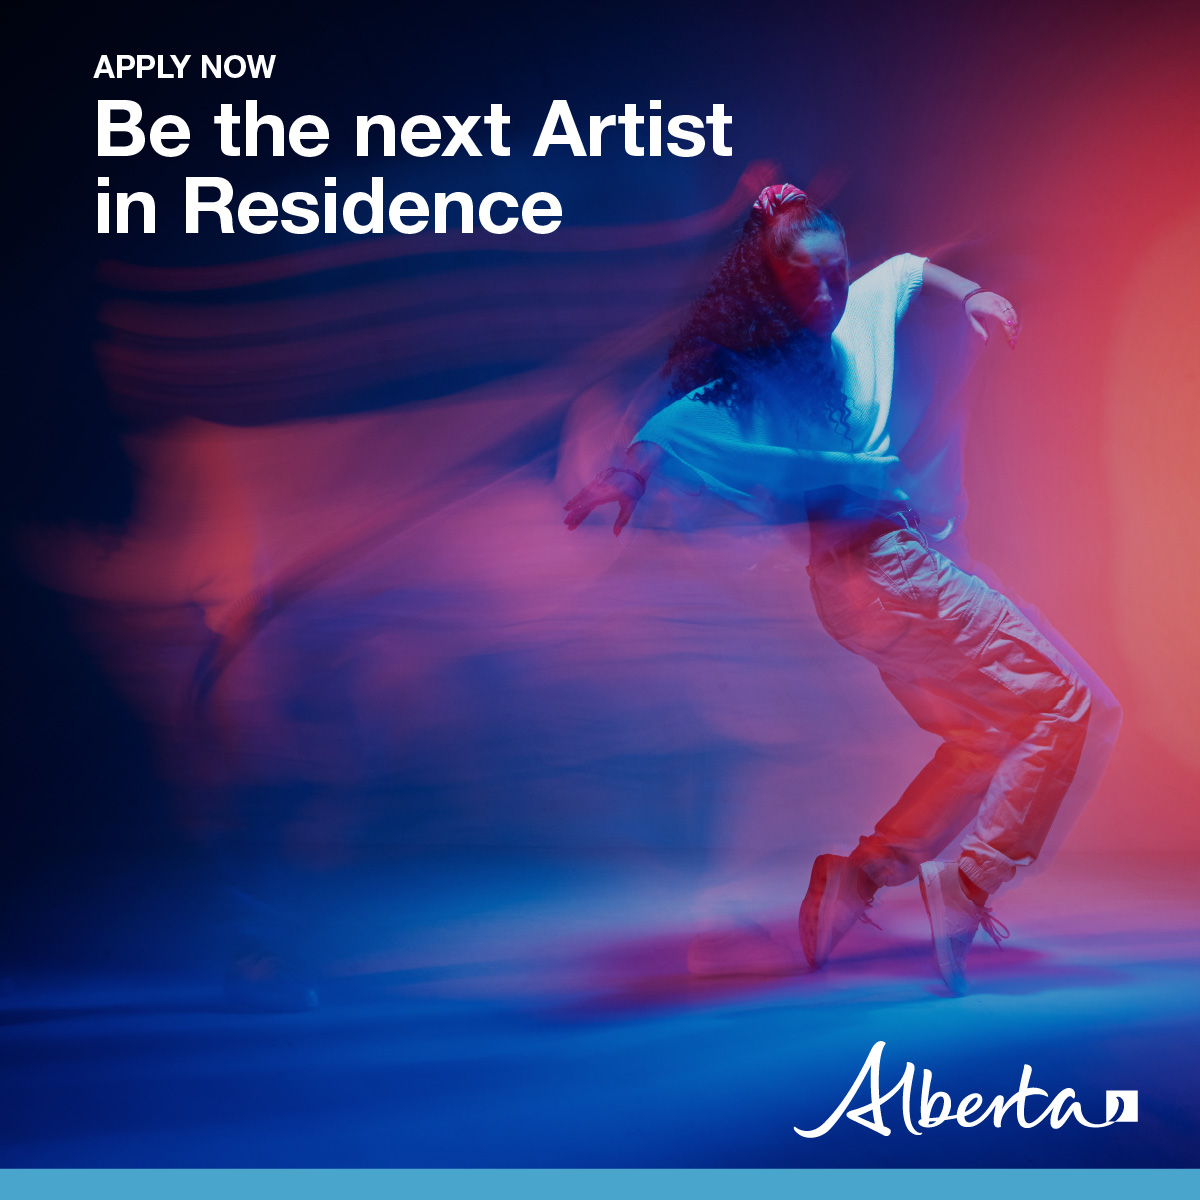 Are you an artist in Alberta? You could be the next Artist in Residence and serve as an Arts Ambassador for Alberta. To all fantastic #AbArtists out there, no matter what your creative field is, seize the opportunity and apply now. Learn more: bit.ly/39qd0YW #ABArts